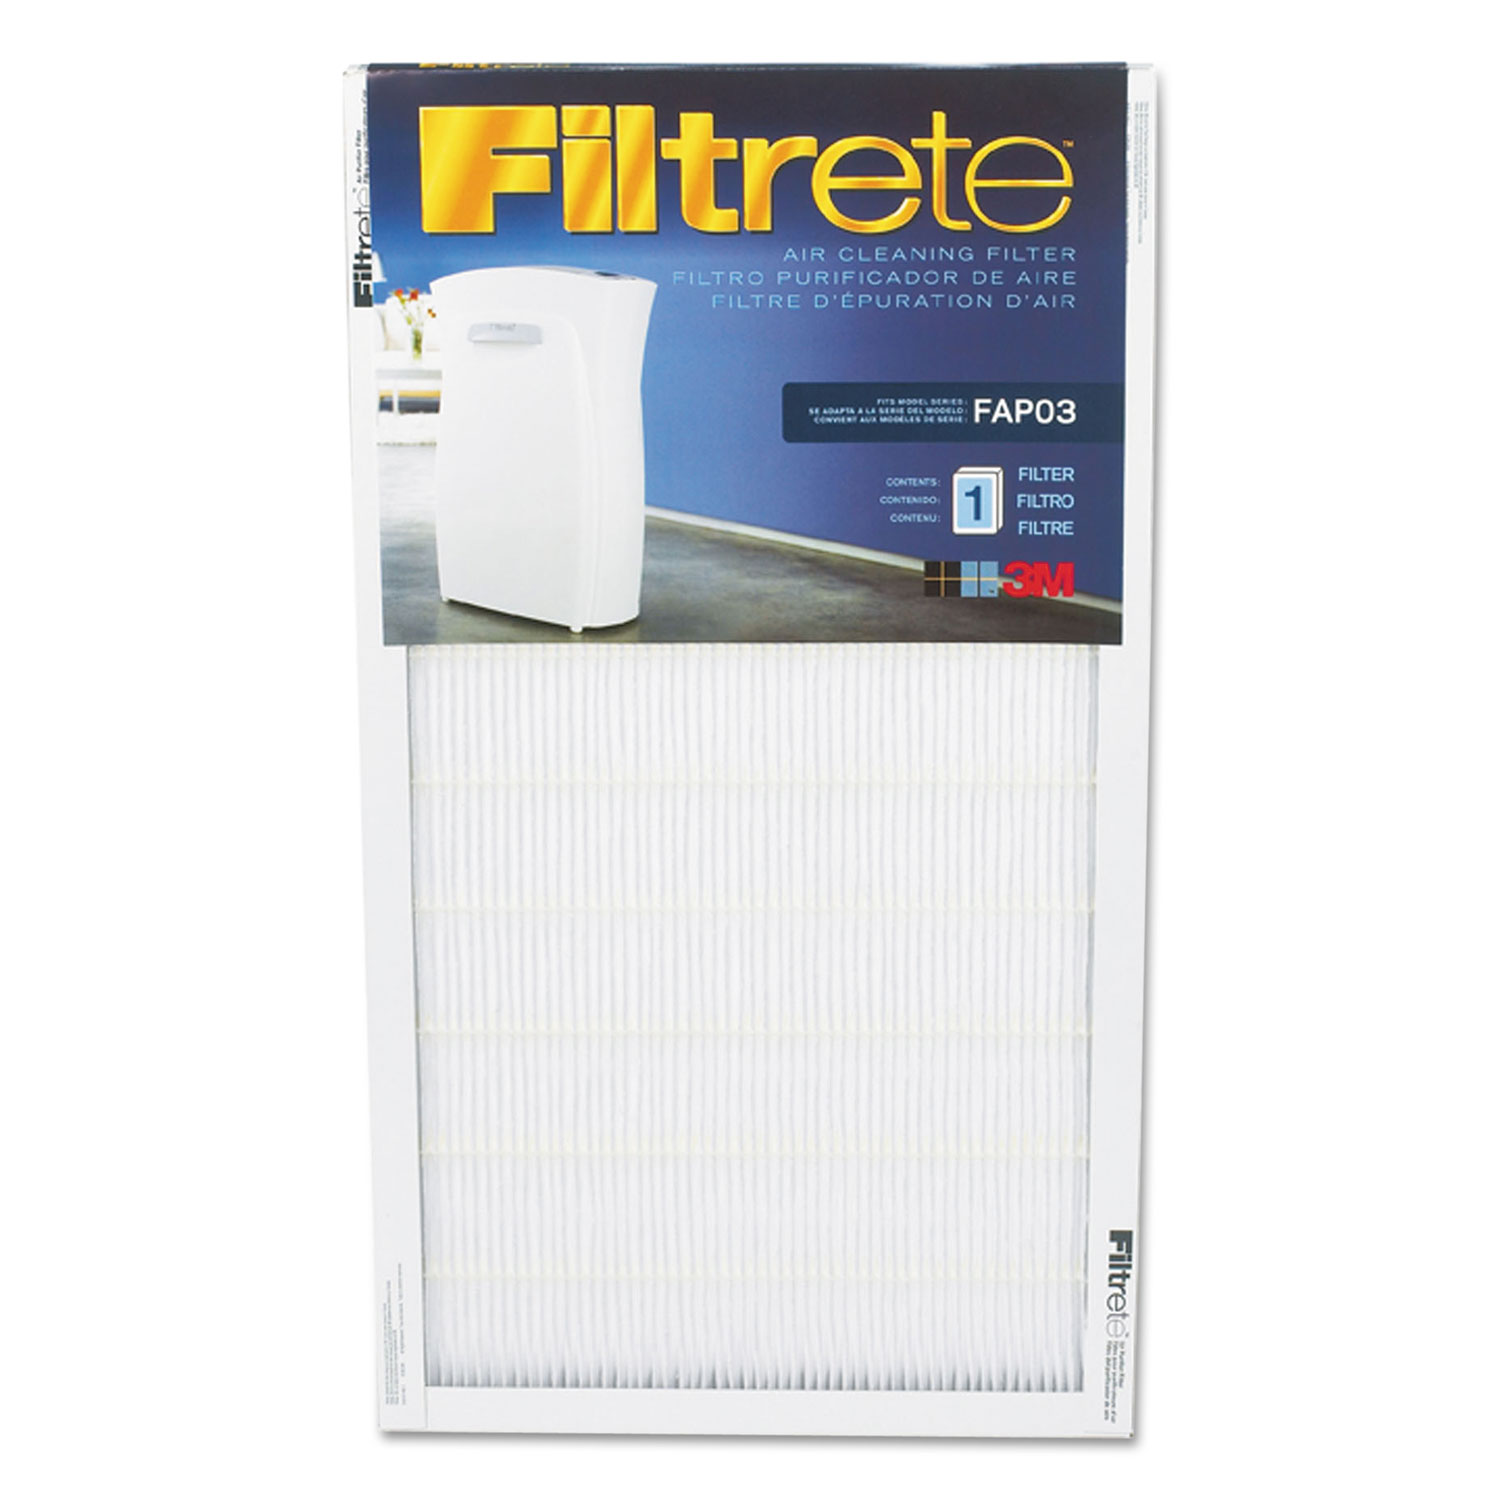 Air Cleaning Filter, 11 3/4 x 21 1/2